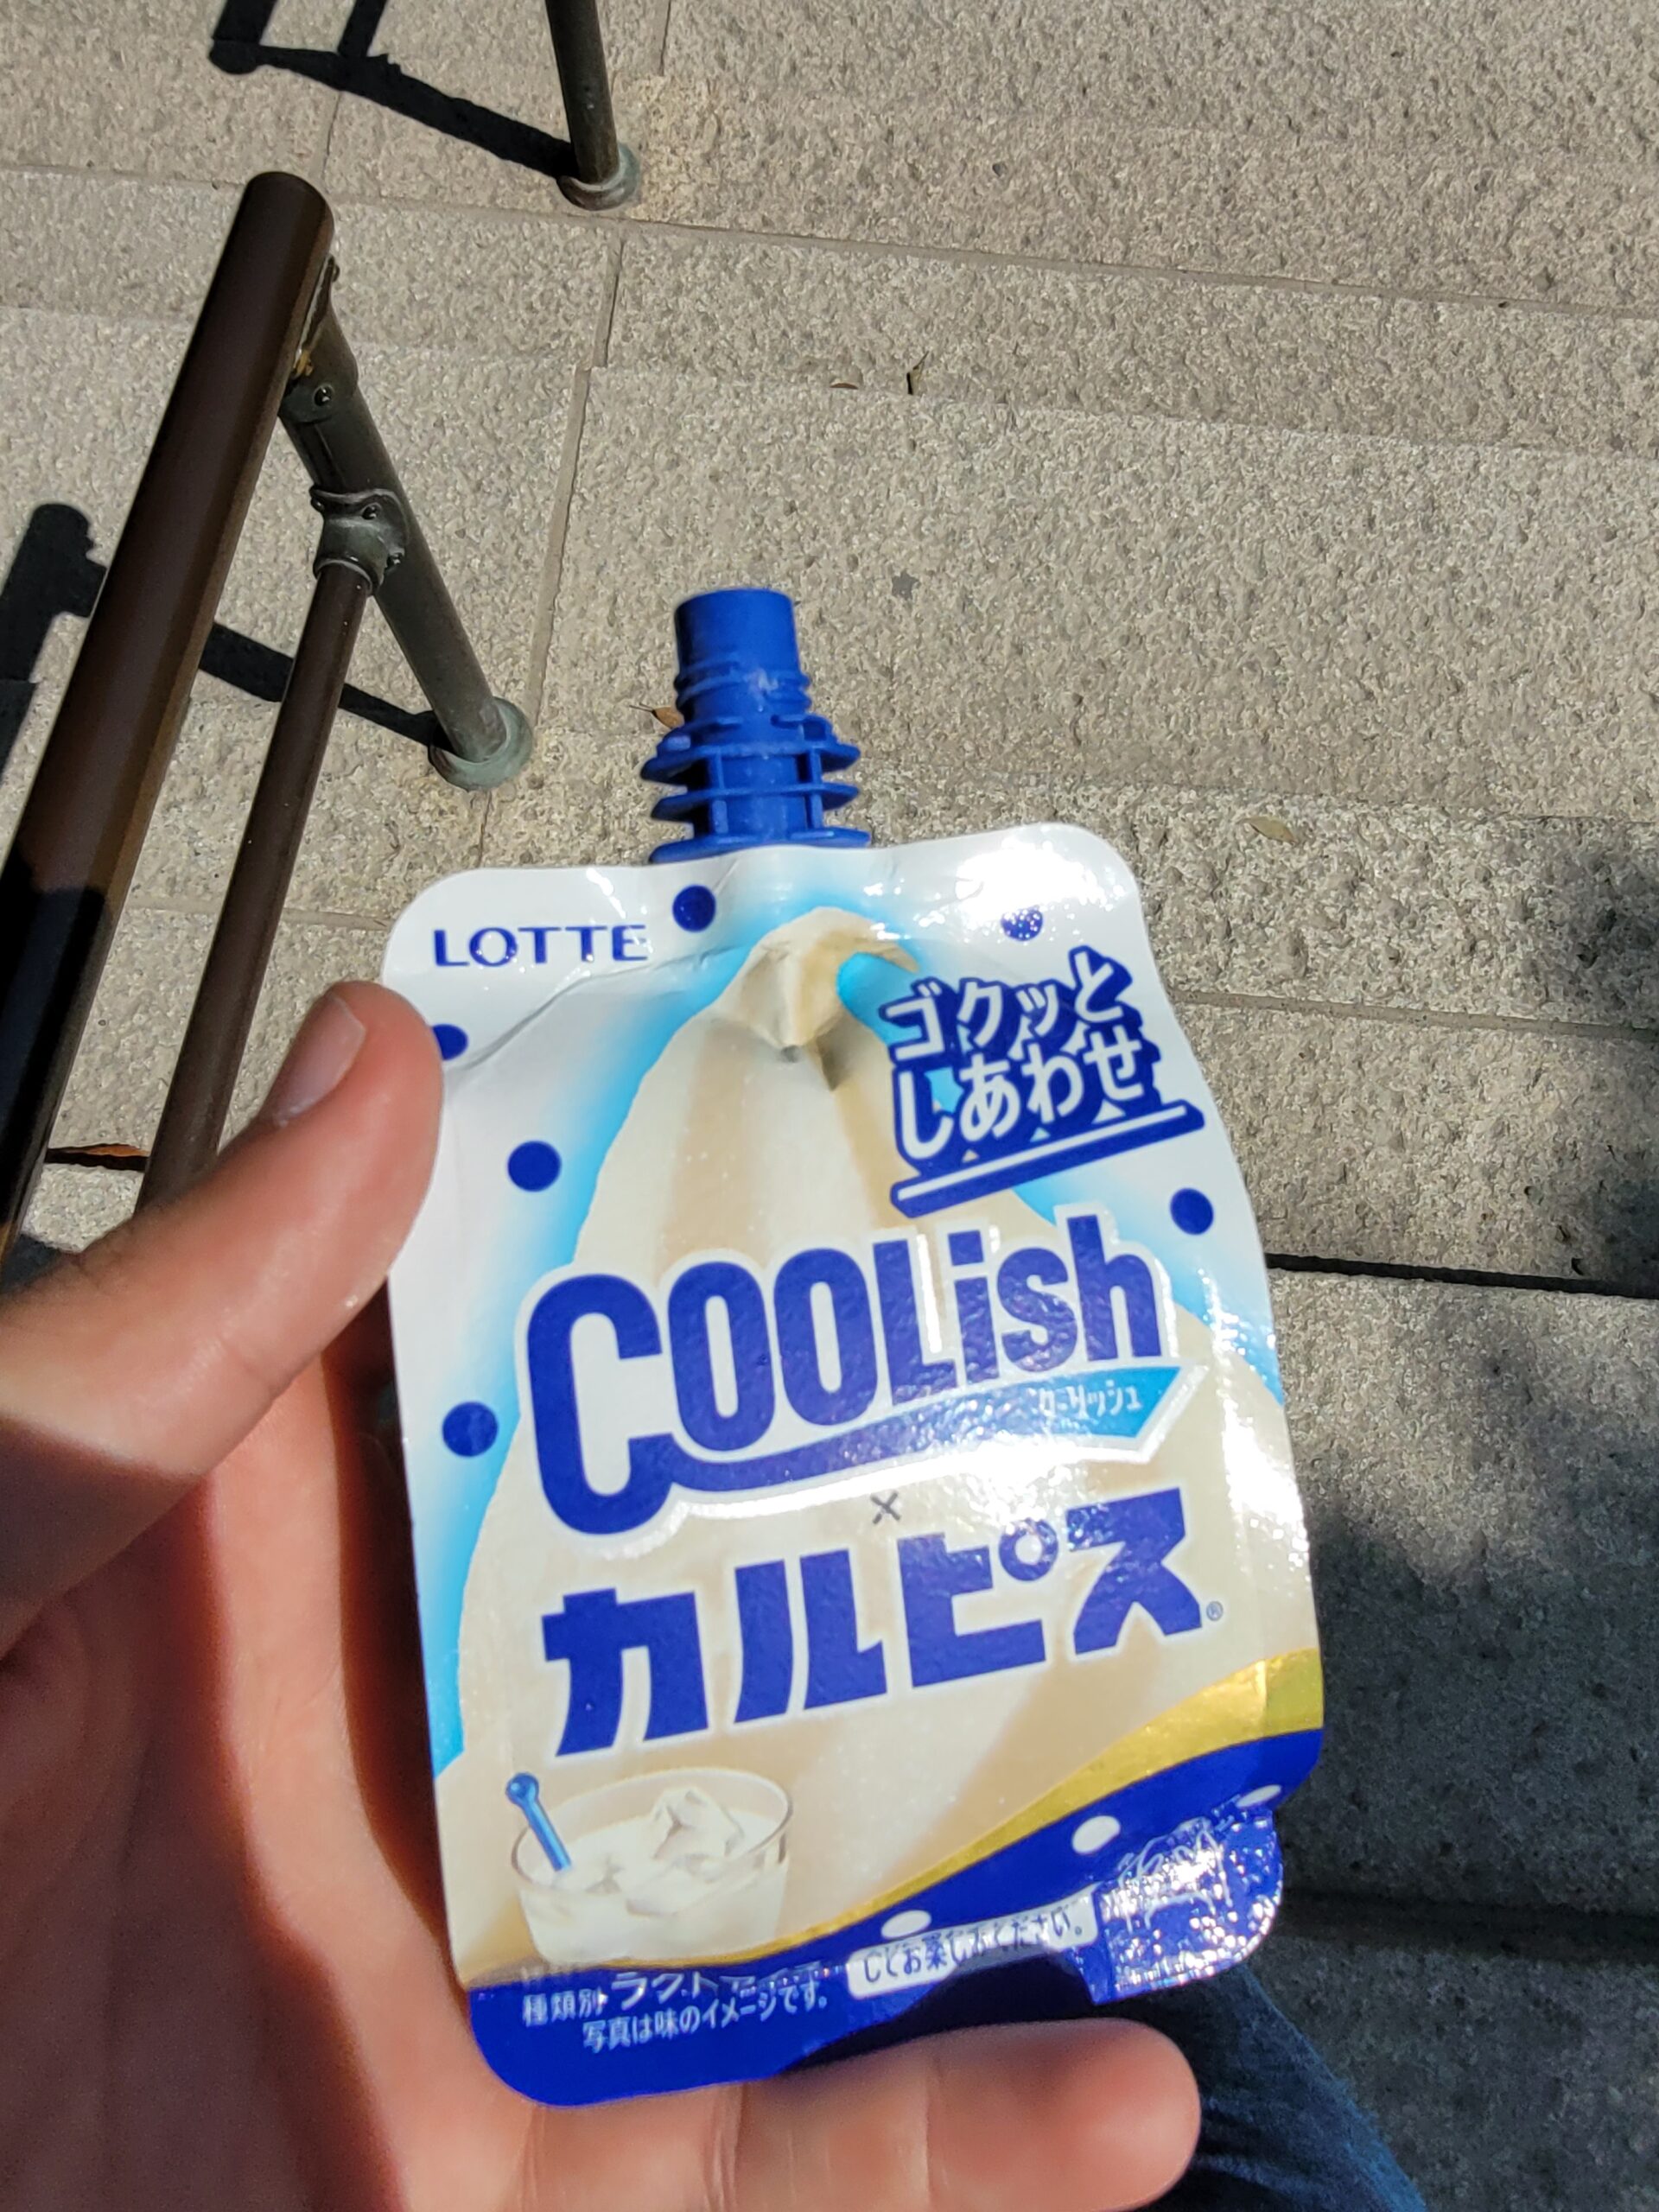 Top 5 combini refreshers to survive the Japanese summer